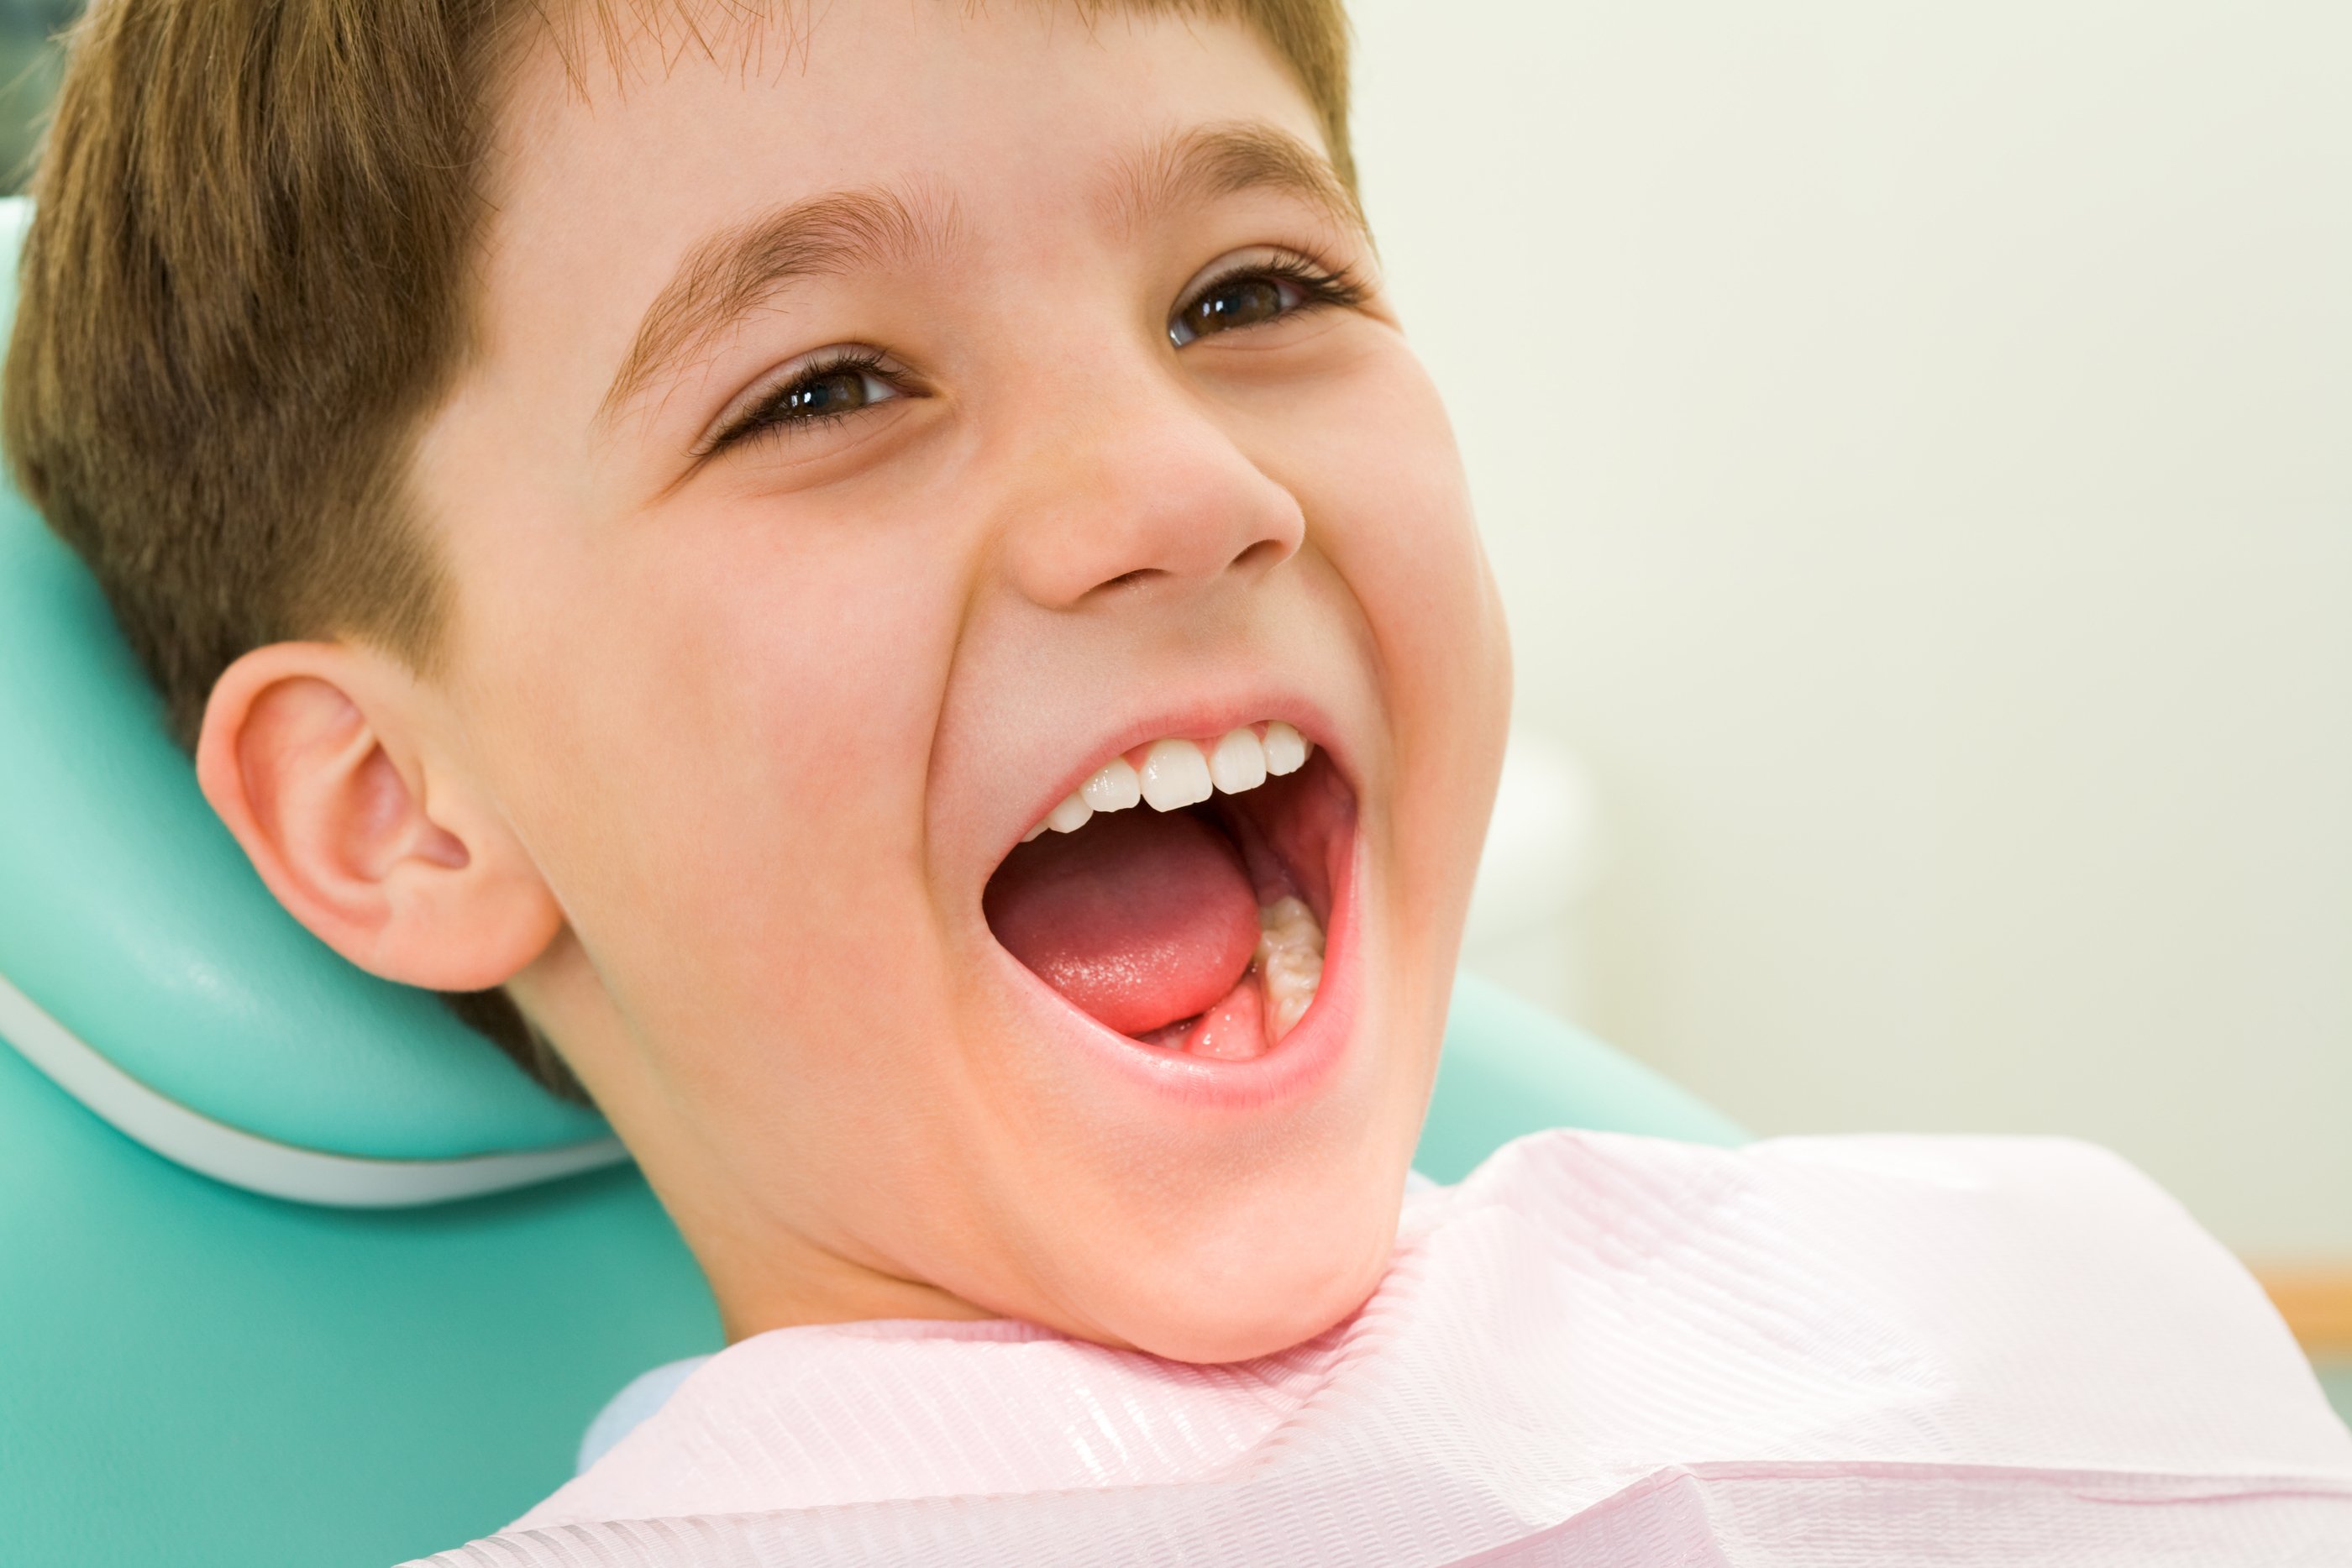 Photo of youngster with his mouth wide open during checkup at the dentists